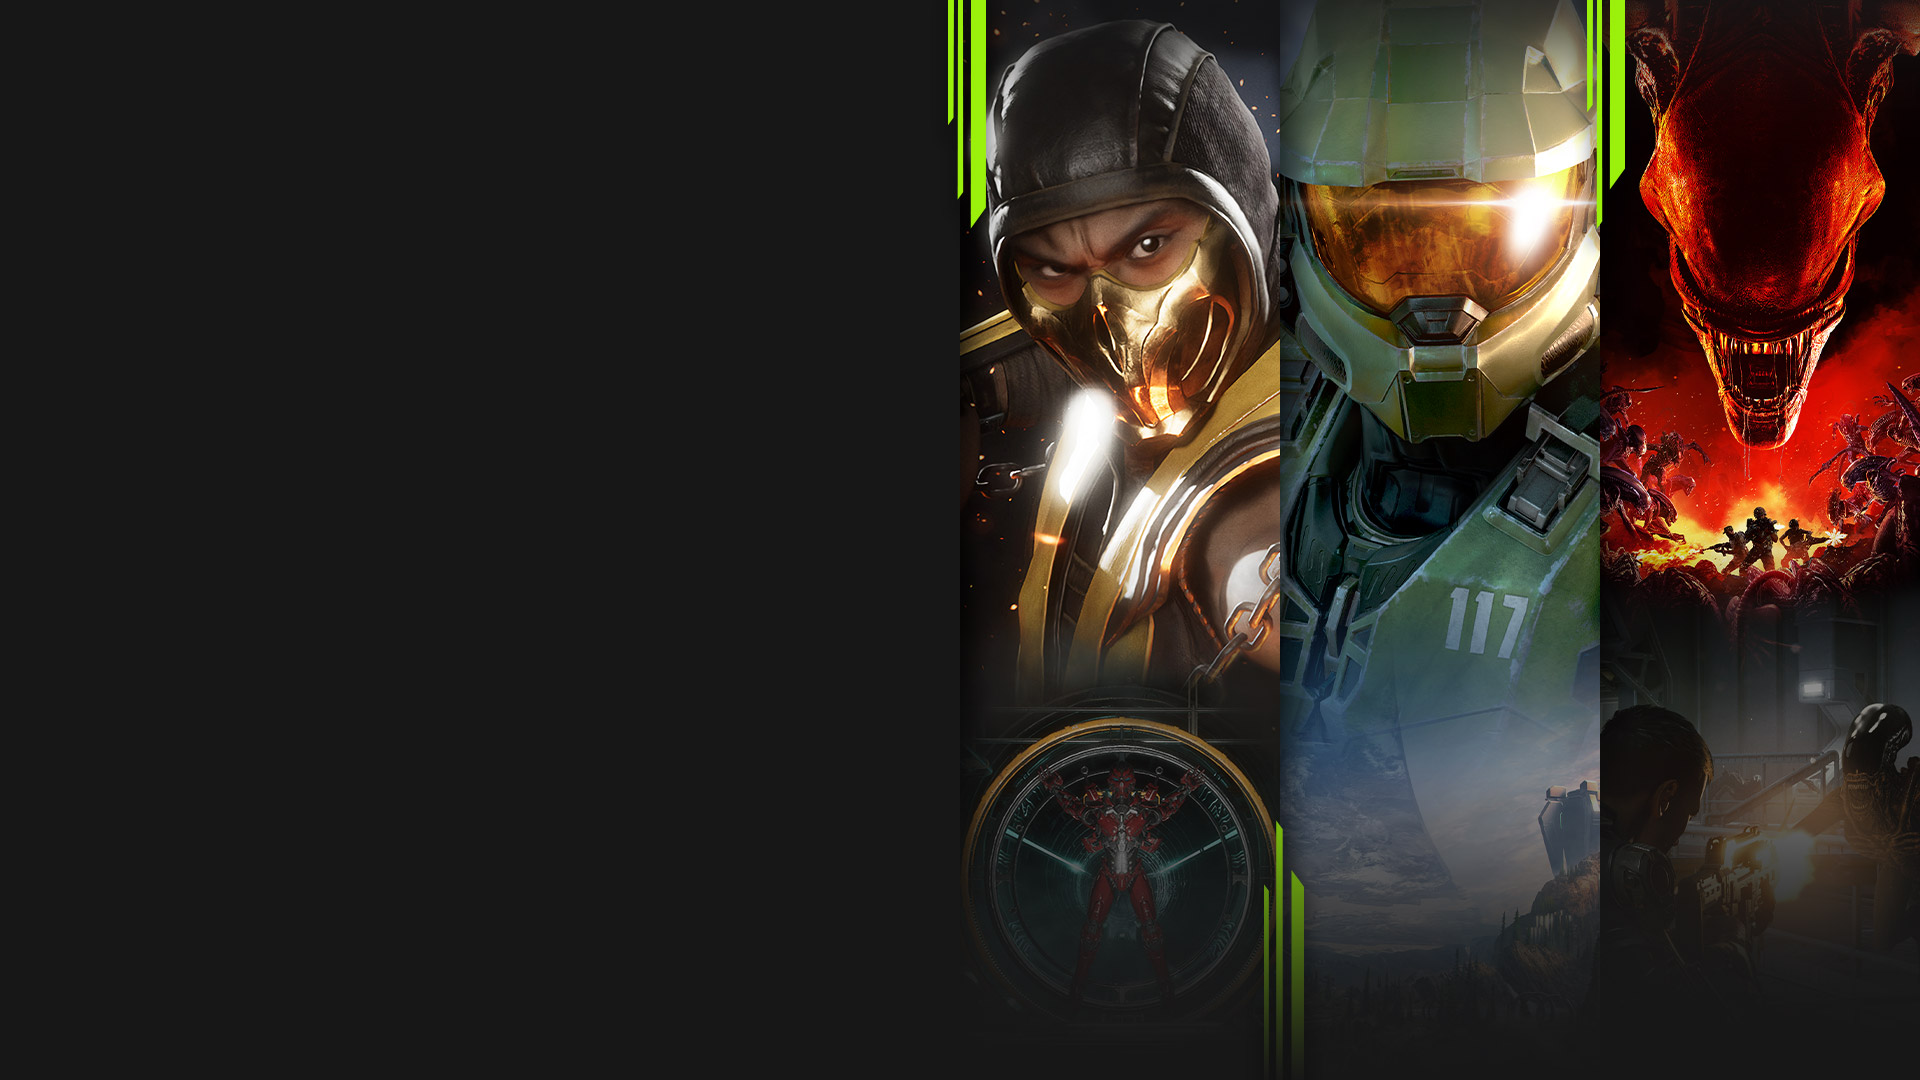 Game art from multiple games available now with Xbox Game Pass including Mortal Kombat 11, Halo Infinite, Aliens: Fireteam Elite and Warhammer 40,000: Battlesector.